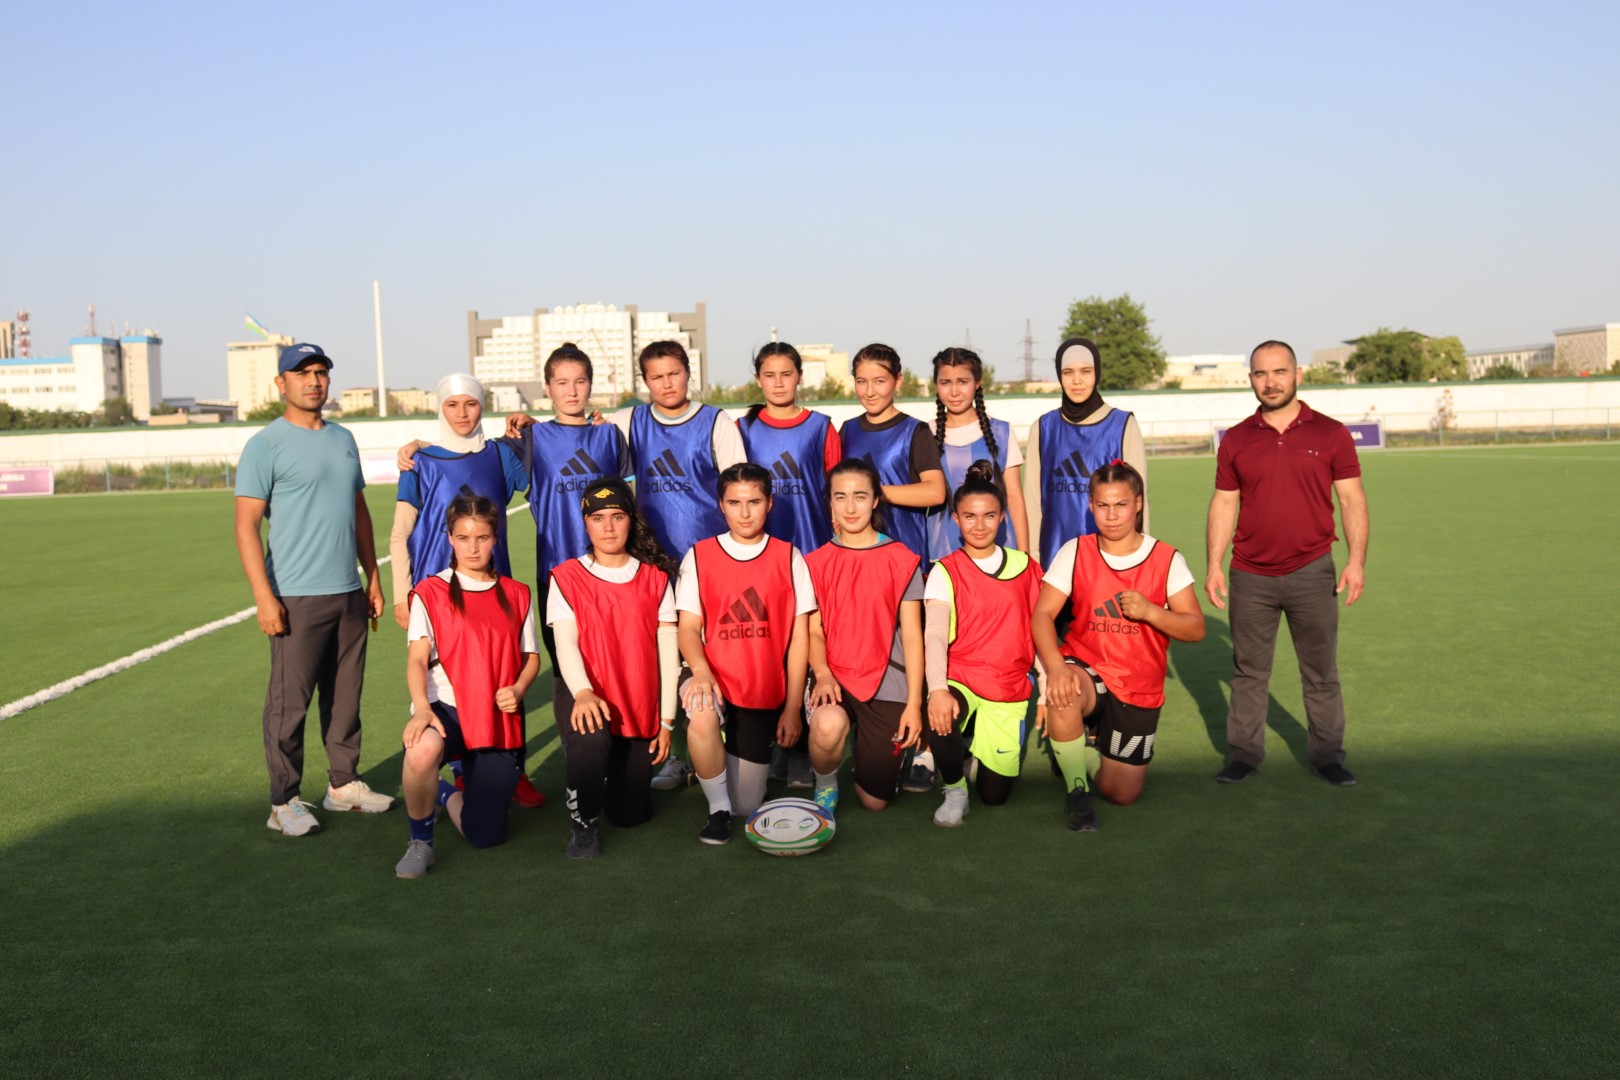 Women’s rugby in Bukhara